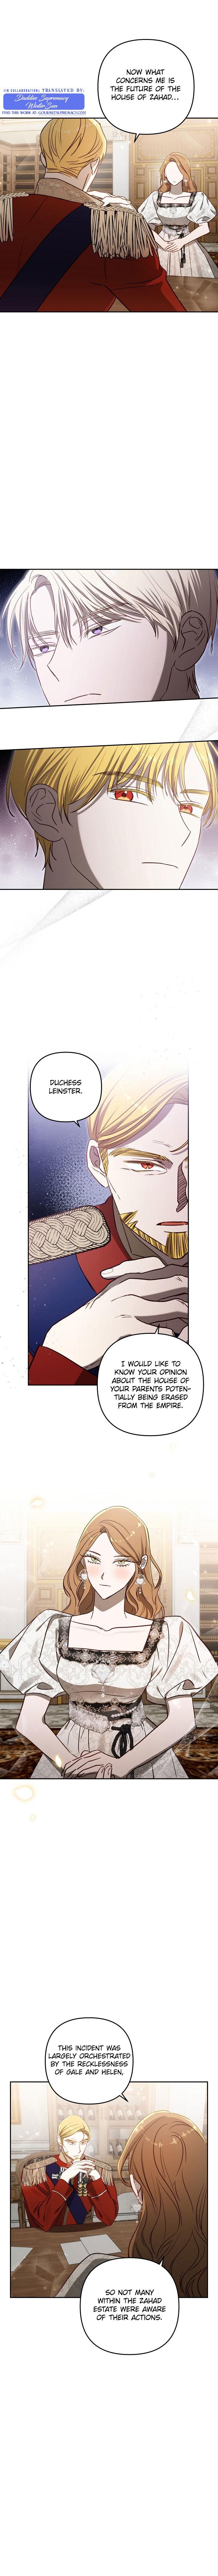 I am Afraid I have Failed to Divorce Chapter 67 page 10